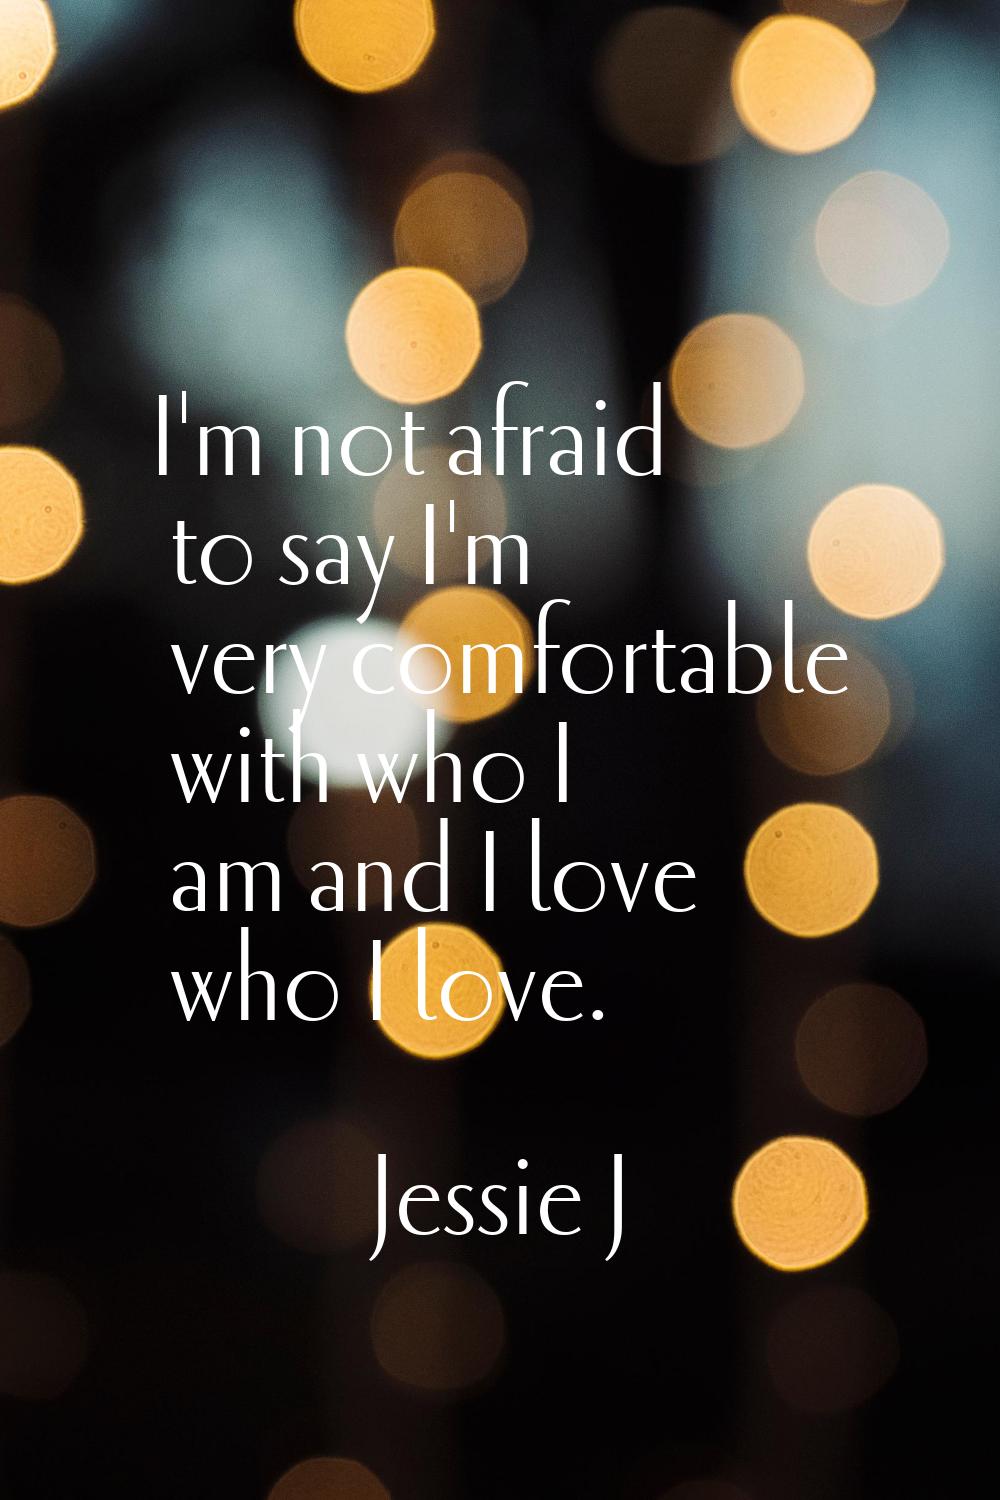 I'm not afraid to say I'm very comfortable with who I am and I love who I love.